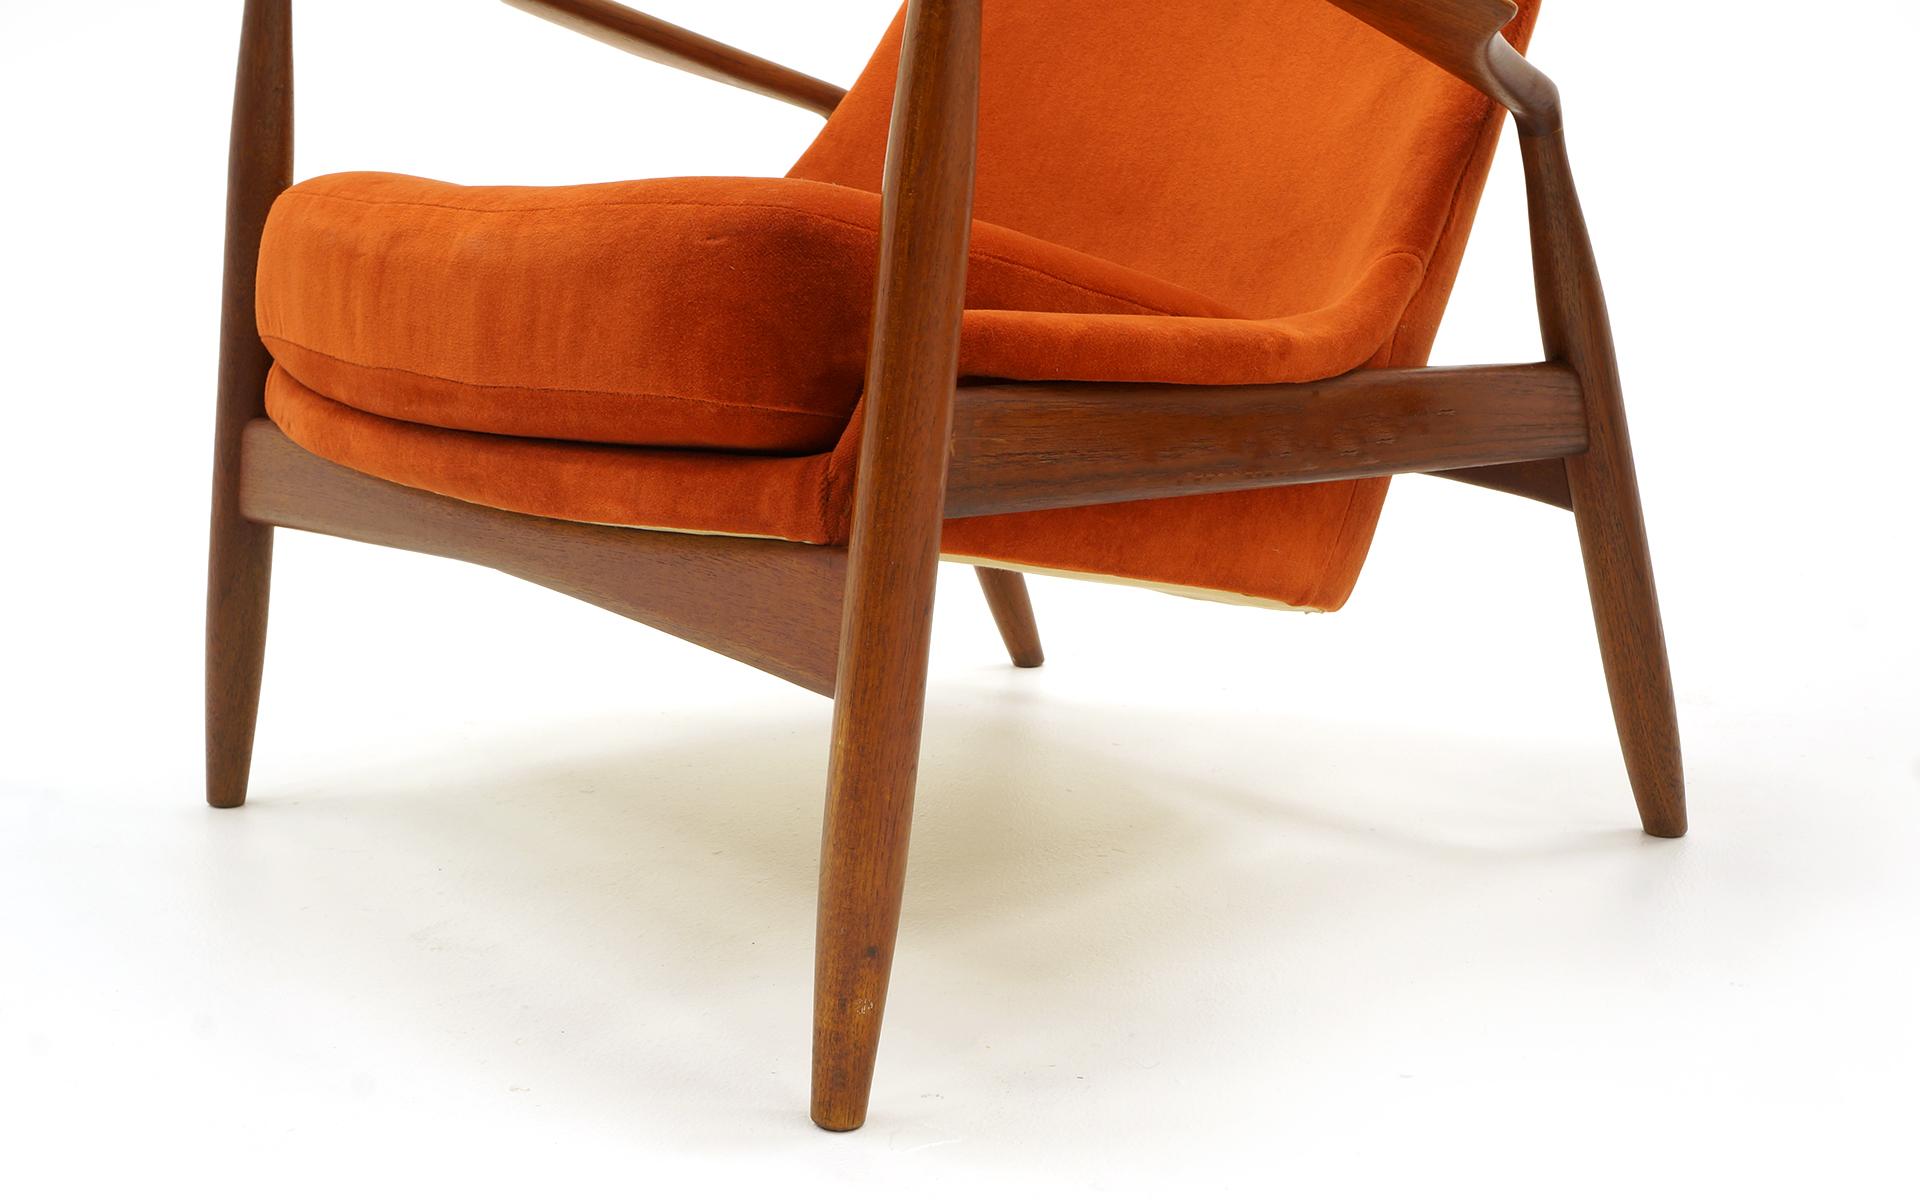 Upholstery Pair of Ib Kofod-Larsen Seal or Sälen Lounge Chairs in Complimenting Fabrics